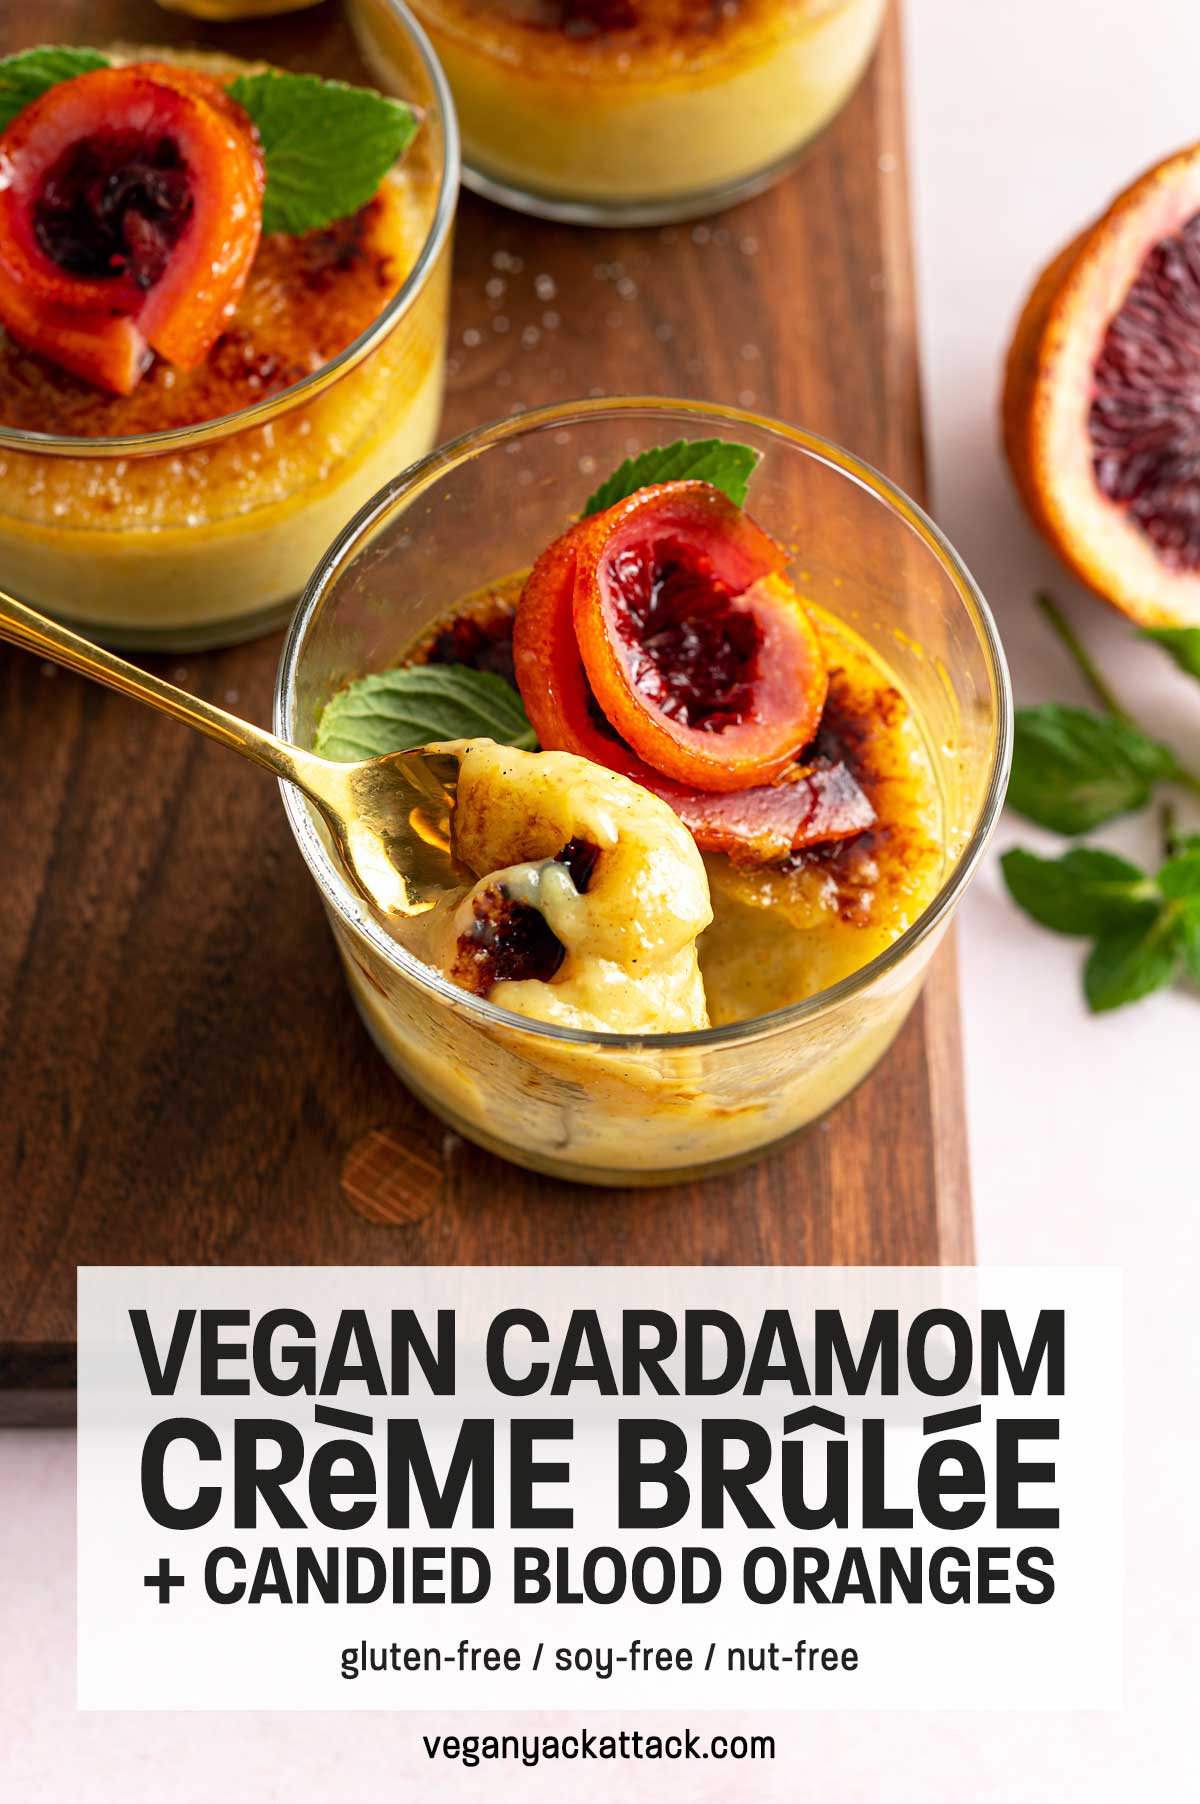 Image of spoon scooping out vegan creme brûlée on a wood board with text overlay "vegan cardamom creme brûlée"